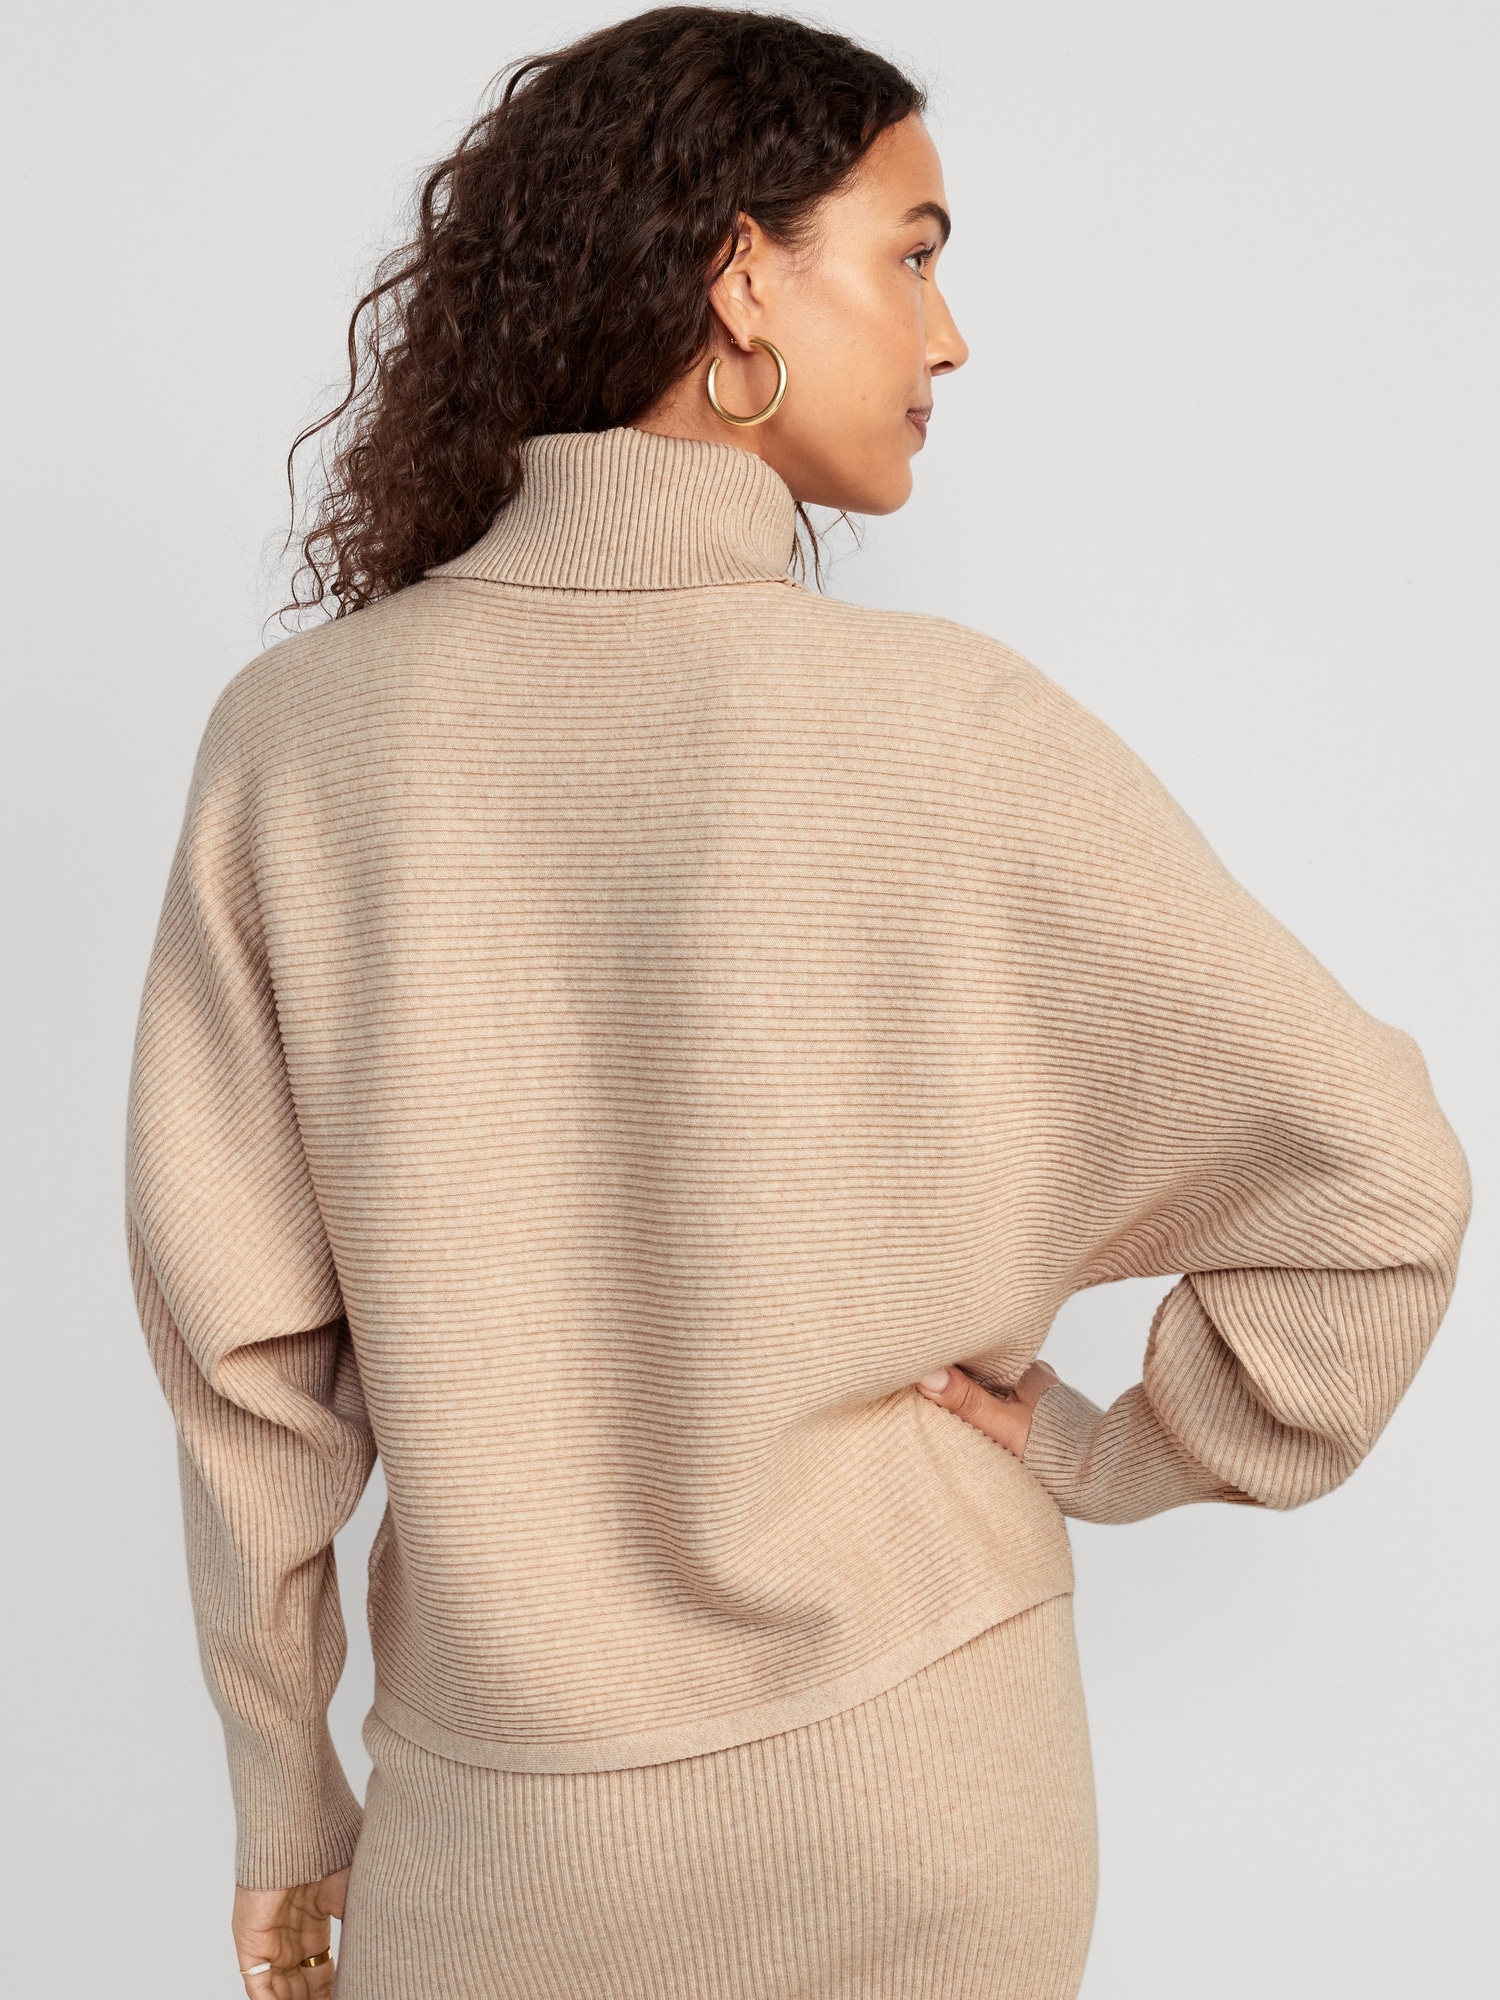 Cropped Rib-Knit Turtleneck Sweater for Women | Old Navy